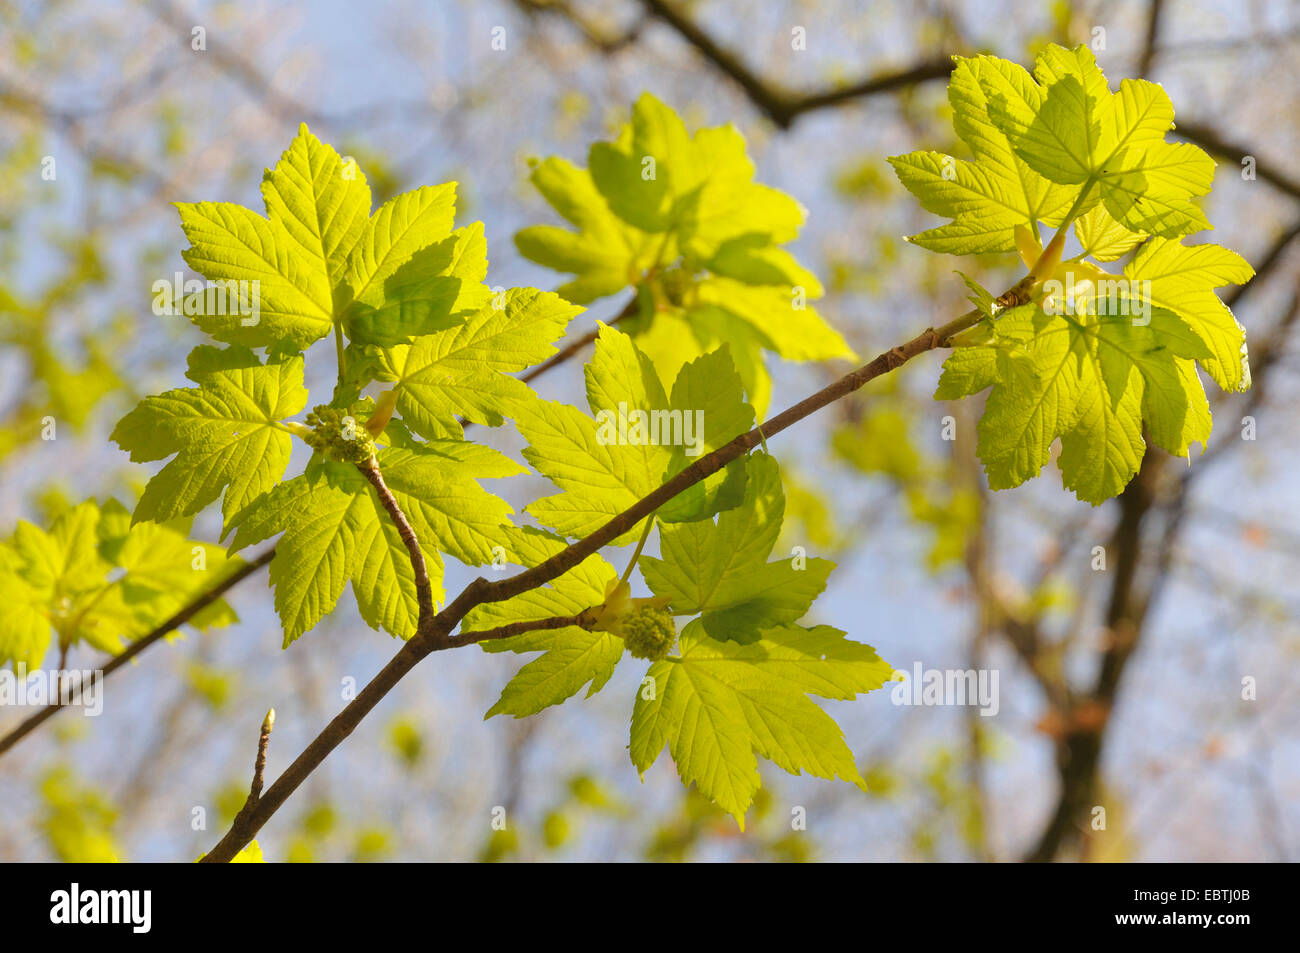 sycamore maple, great maple (Acer pseudoplatanus), proliferation at a twig, Germany, North Rhine-Westphalia Stock Photo